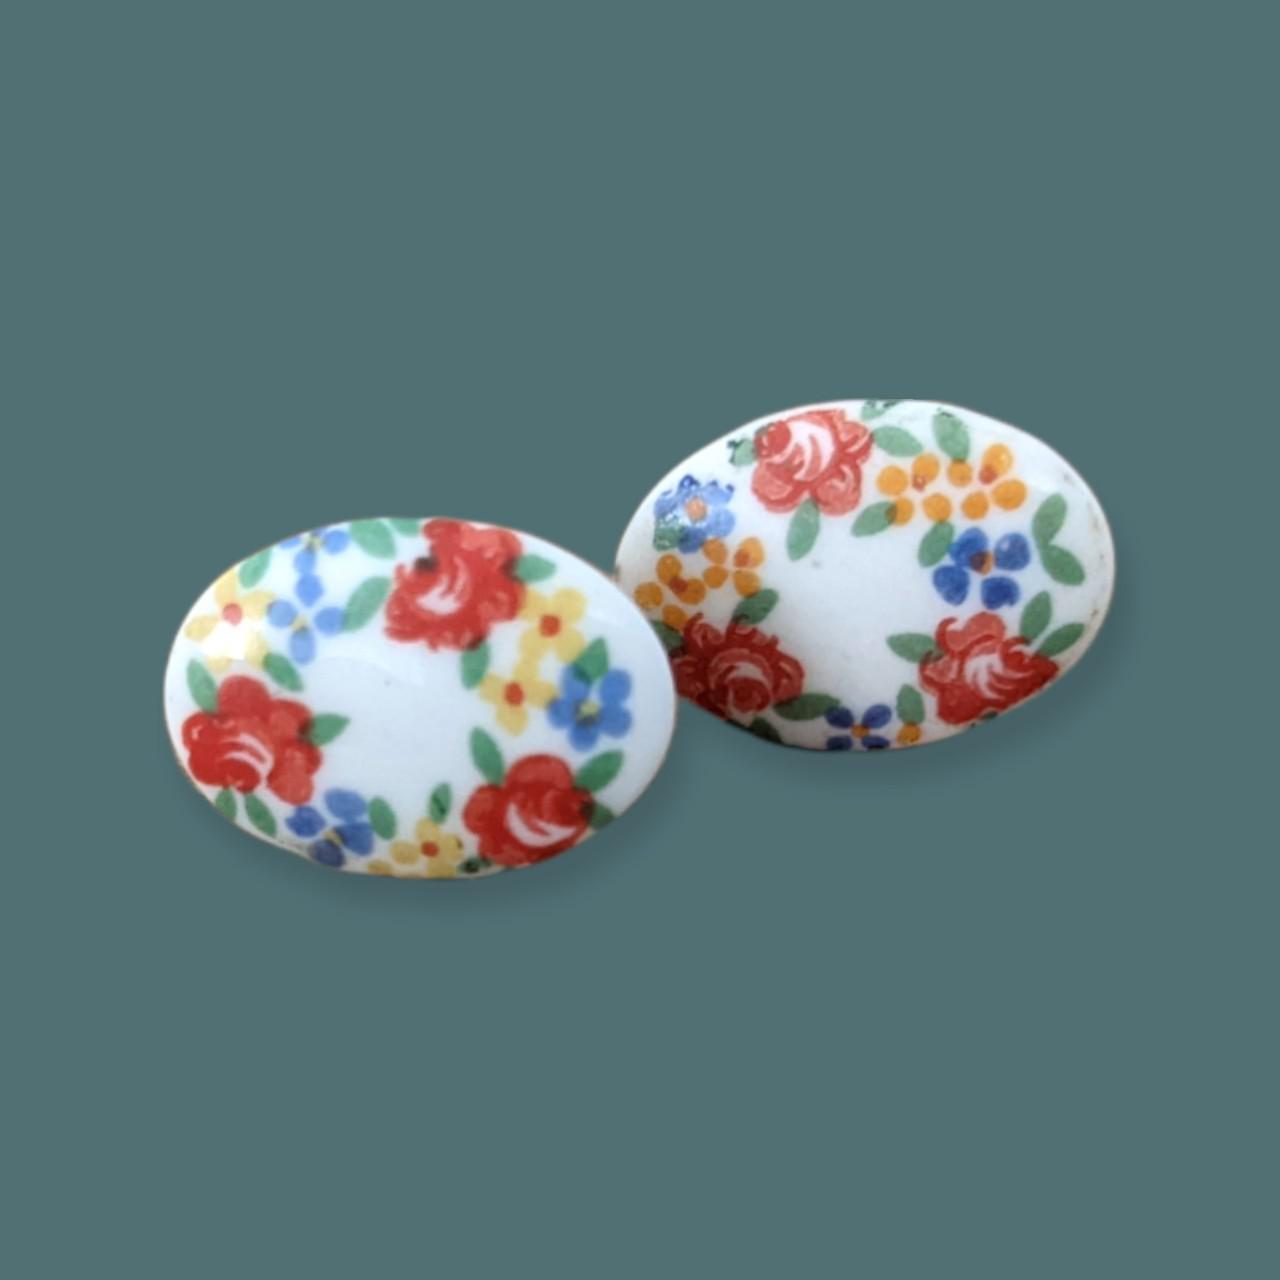 Product Image 2 - Cottagecore Floral Oral Earrings

Super sweet